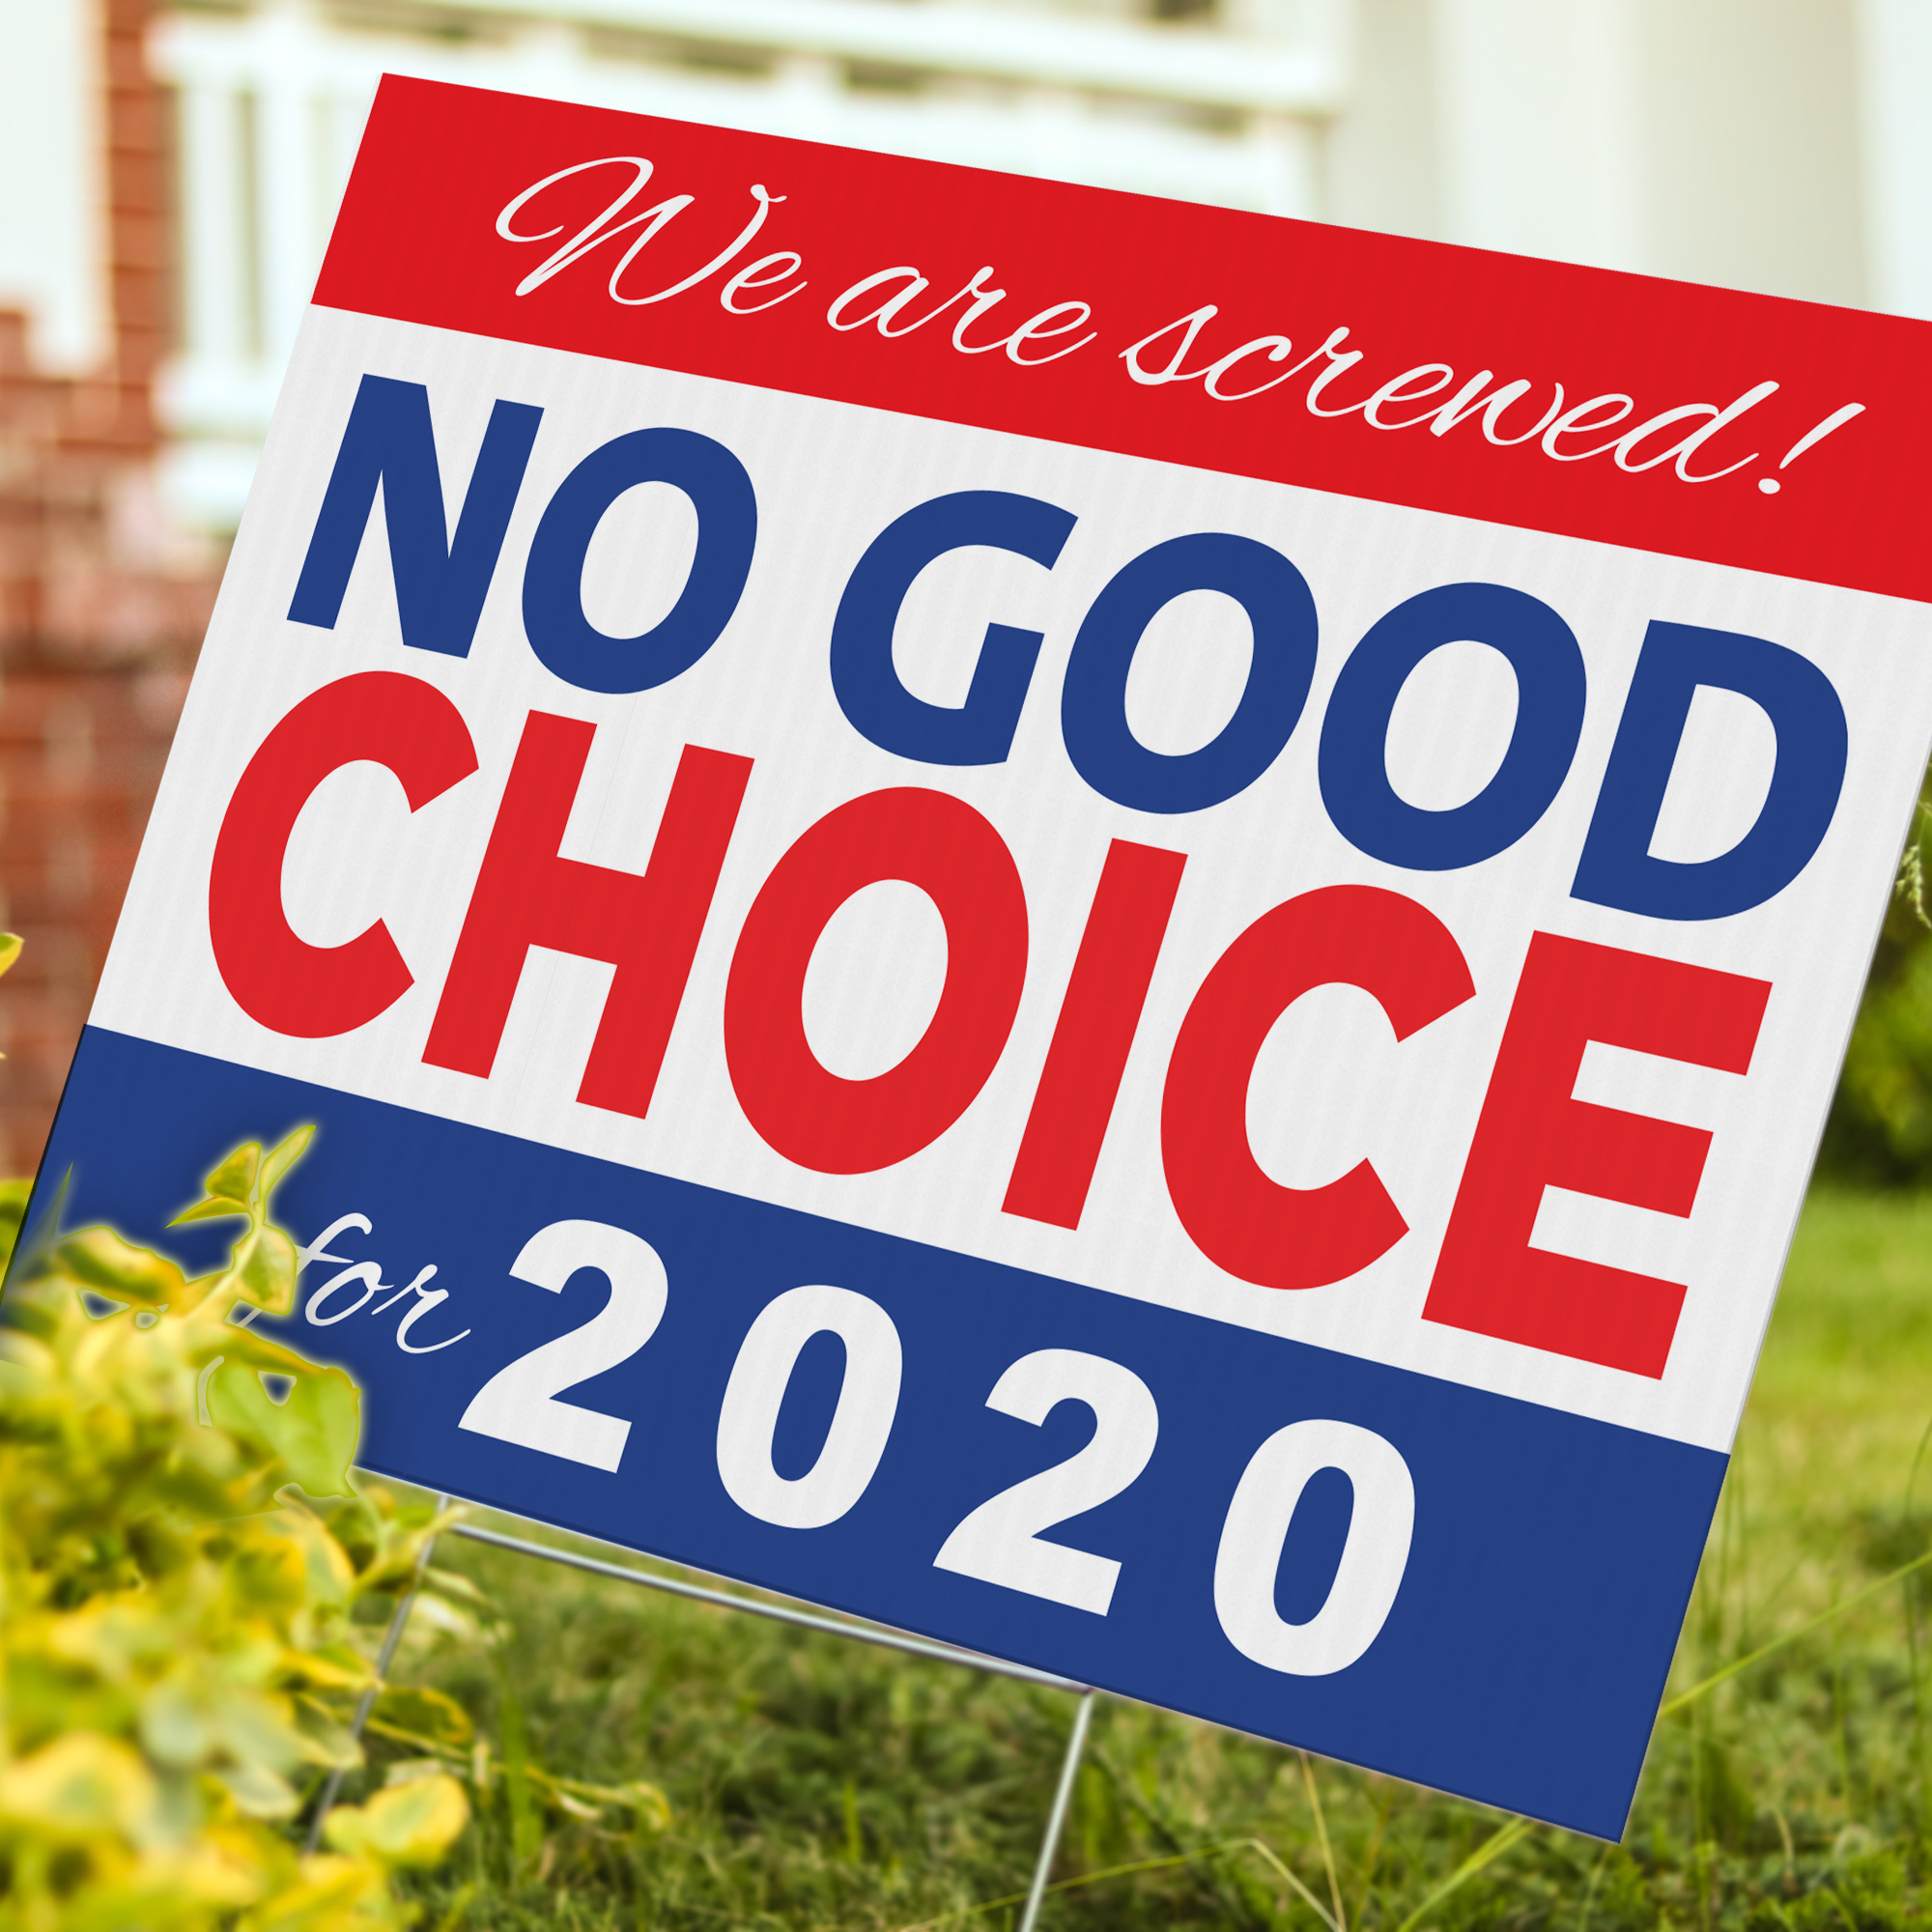 No Good Choice for 2020 - We Are Screwed Political Yard Sign - 24 x 18 inch